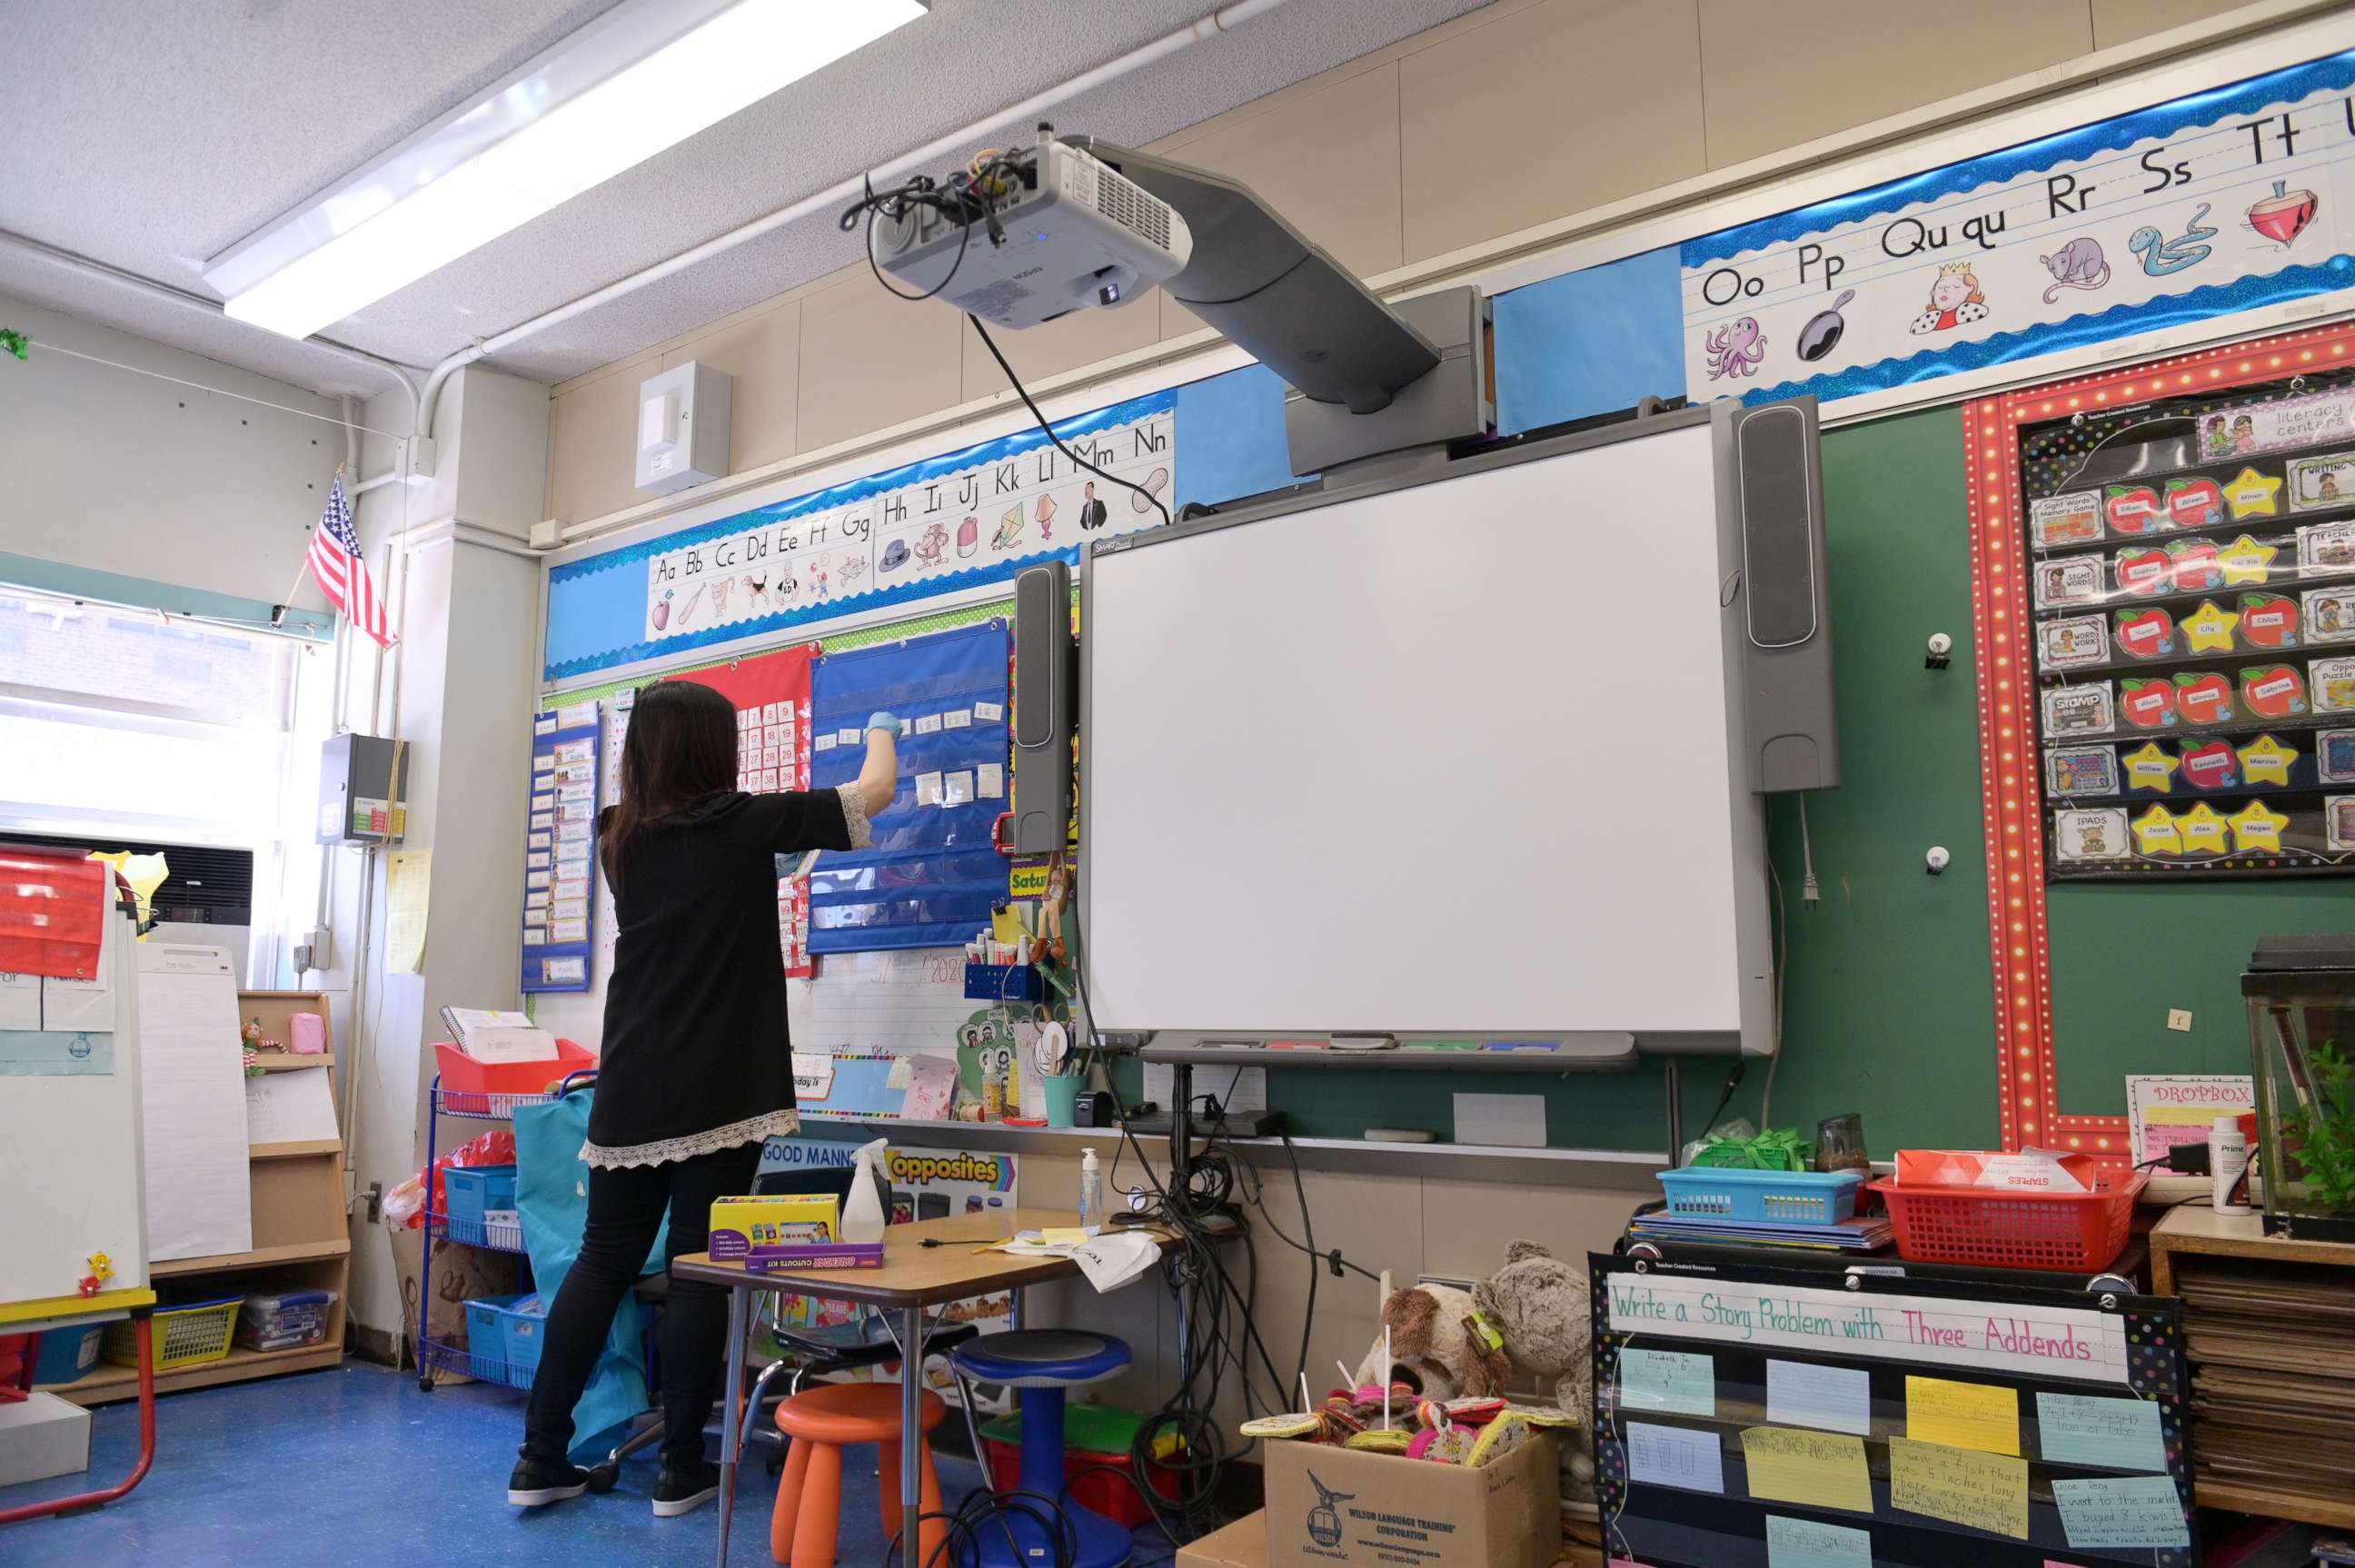 PHOTO: A teacher collects supplies needed to continue remote teaching through the end of the school year at Yung Wing School P.S. 124 on May 14, 2020 in New York City.